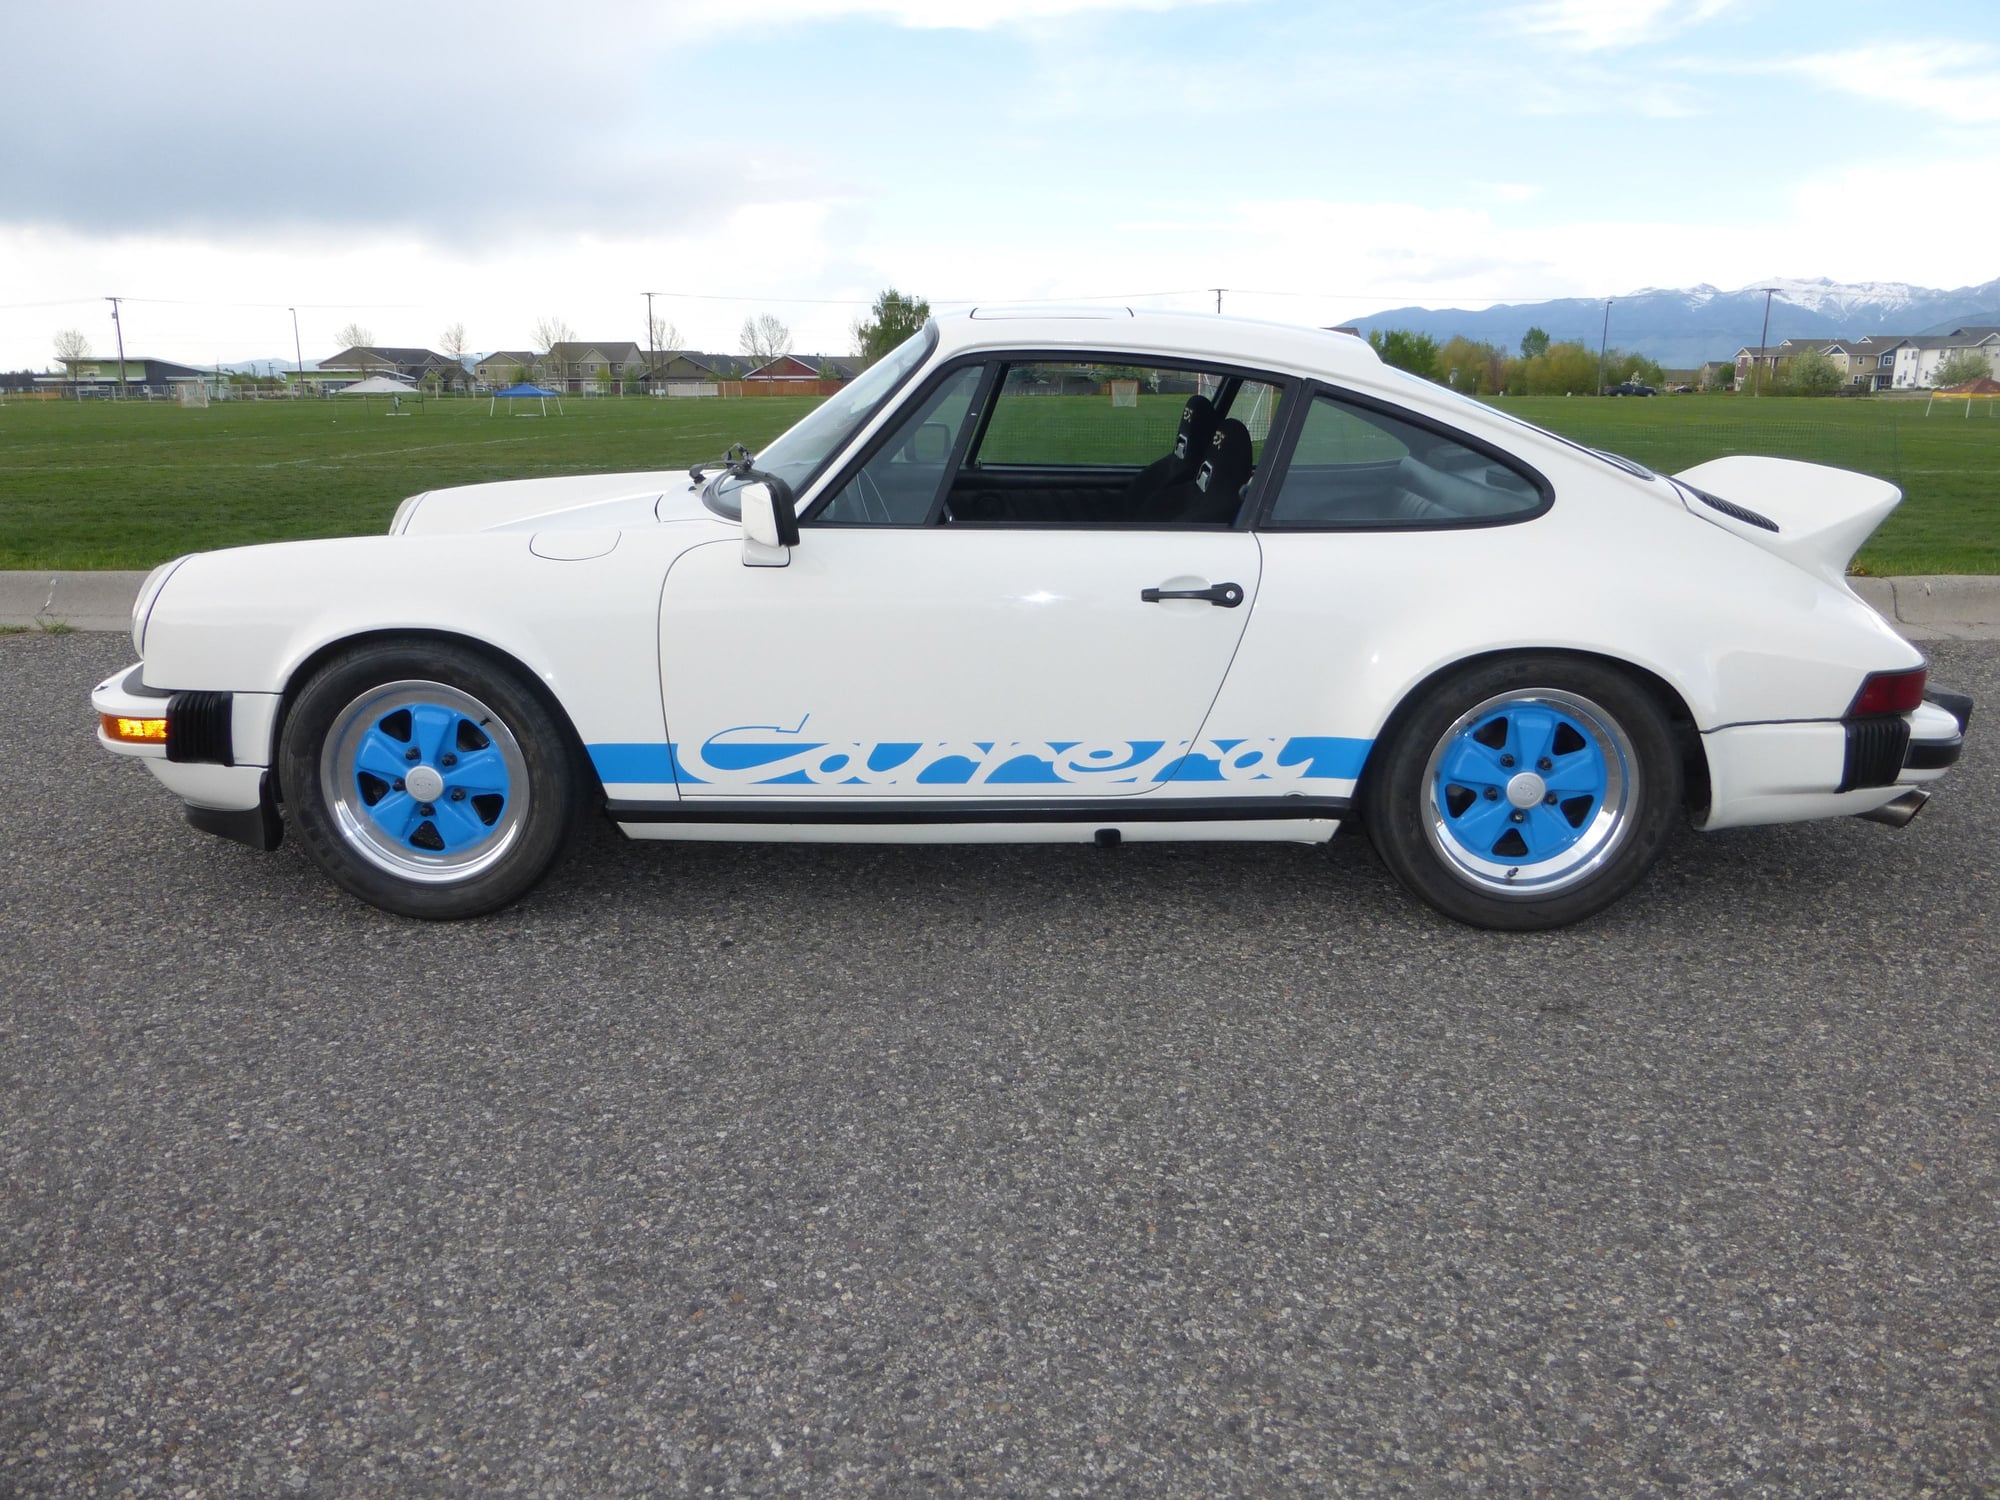 1982 Porsche 911 - 1982 Porsche 911 SC Sunroof Coupe - Used - VIN WP0AA0919CS121714 - 6 cyl - 2WD - Manual - Coupe - White - Bozeman, MT 59718, United States